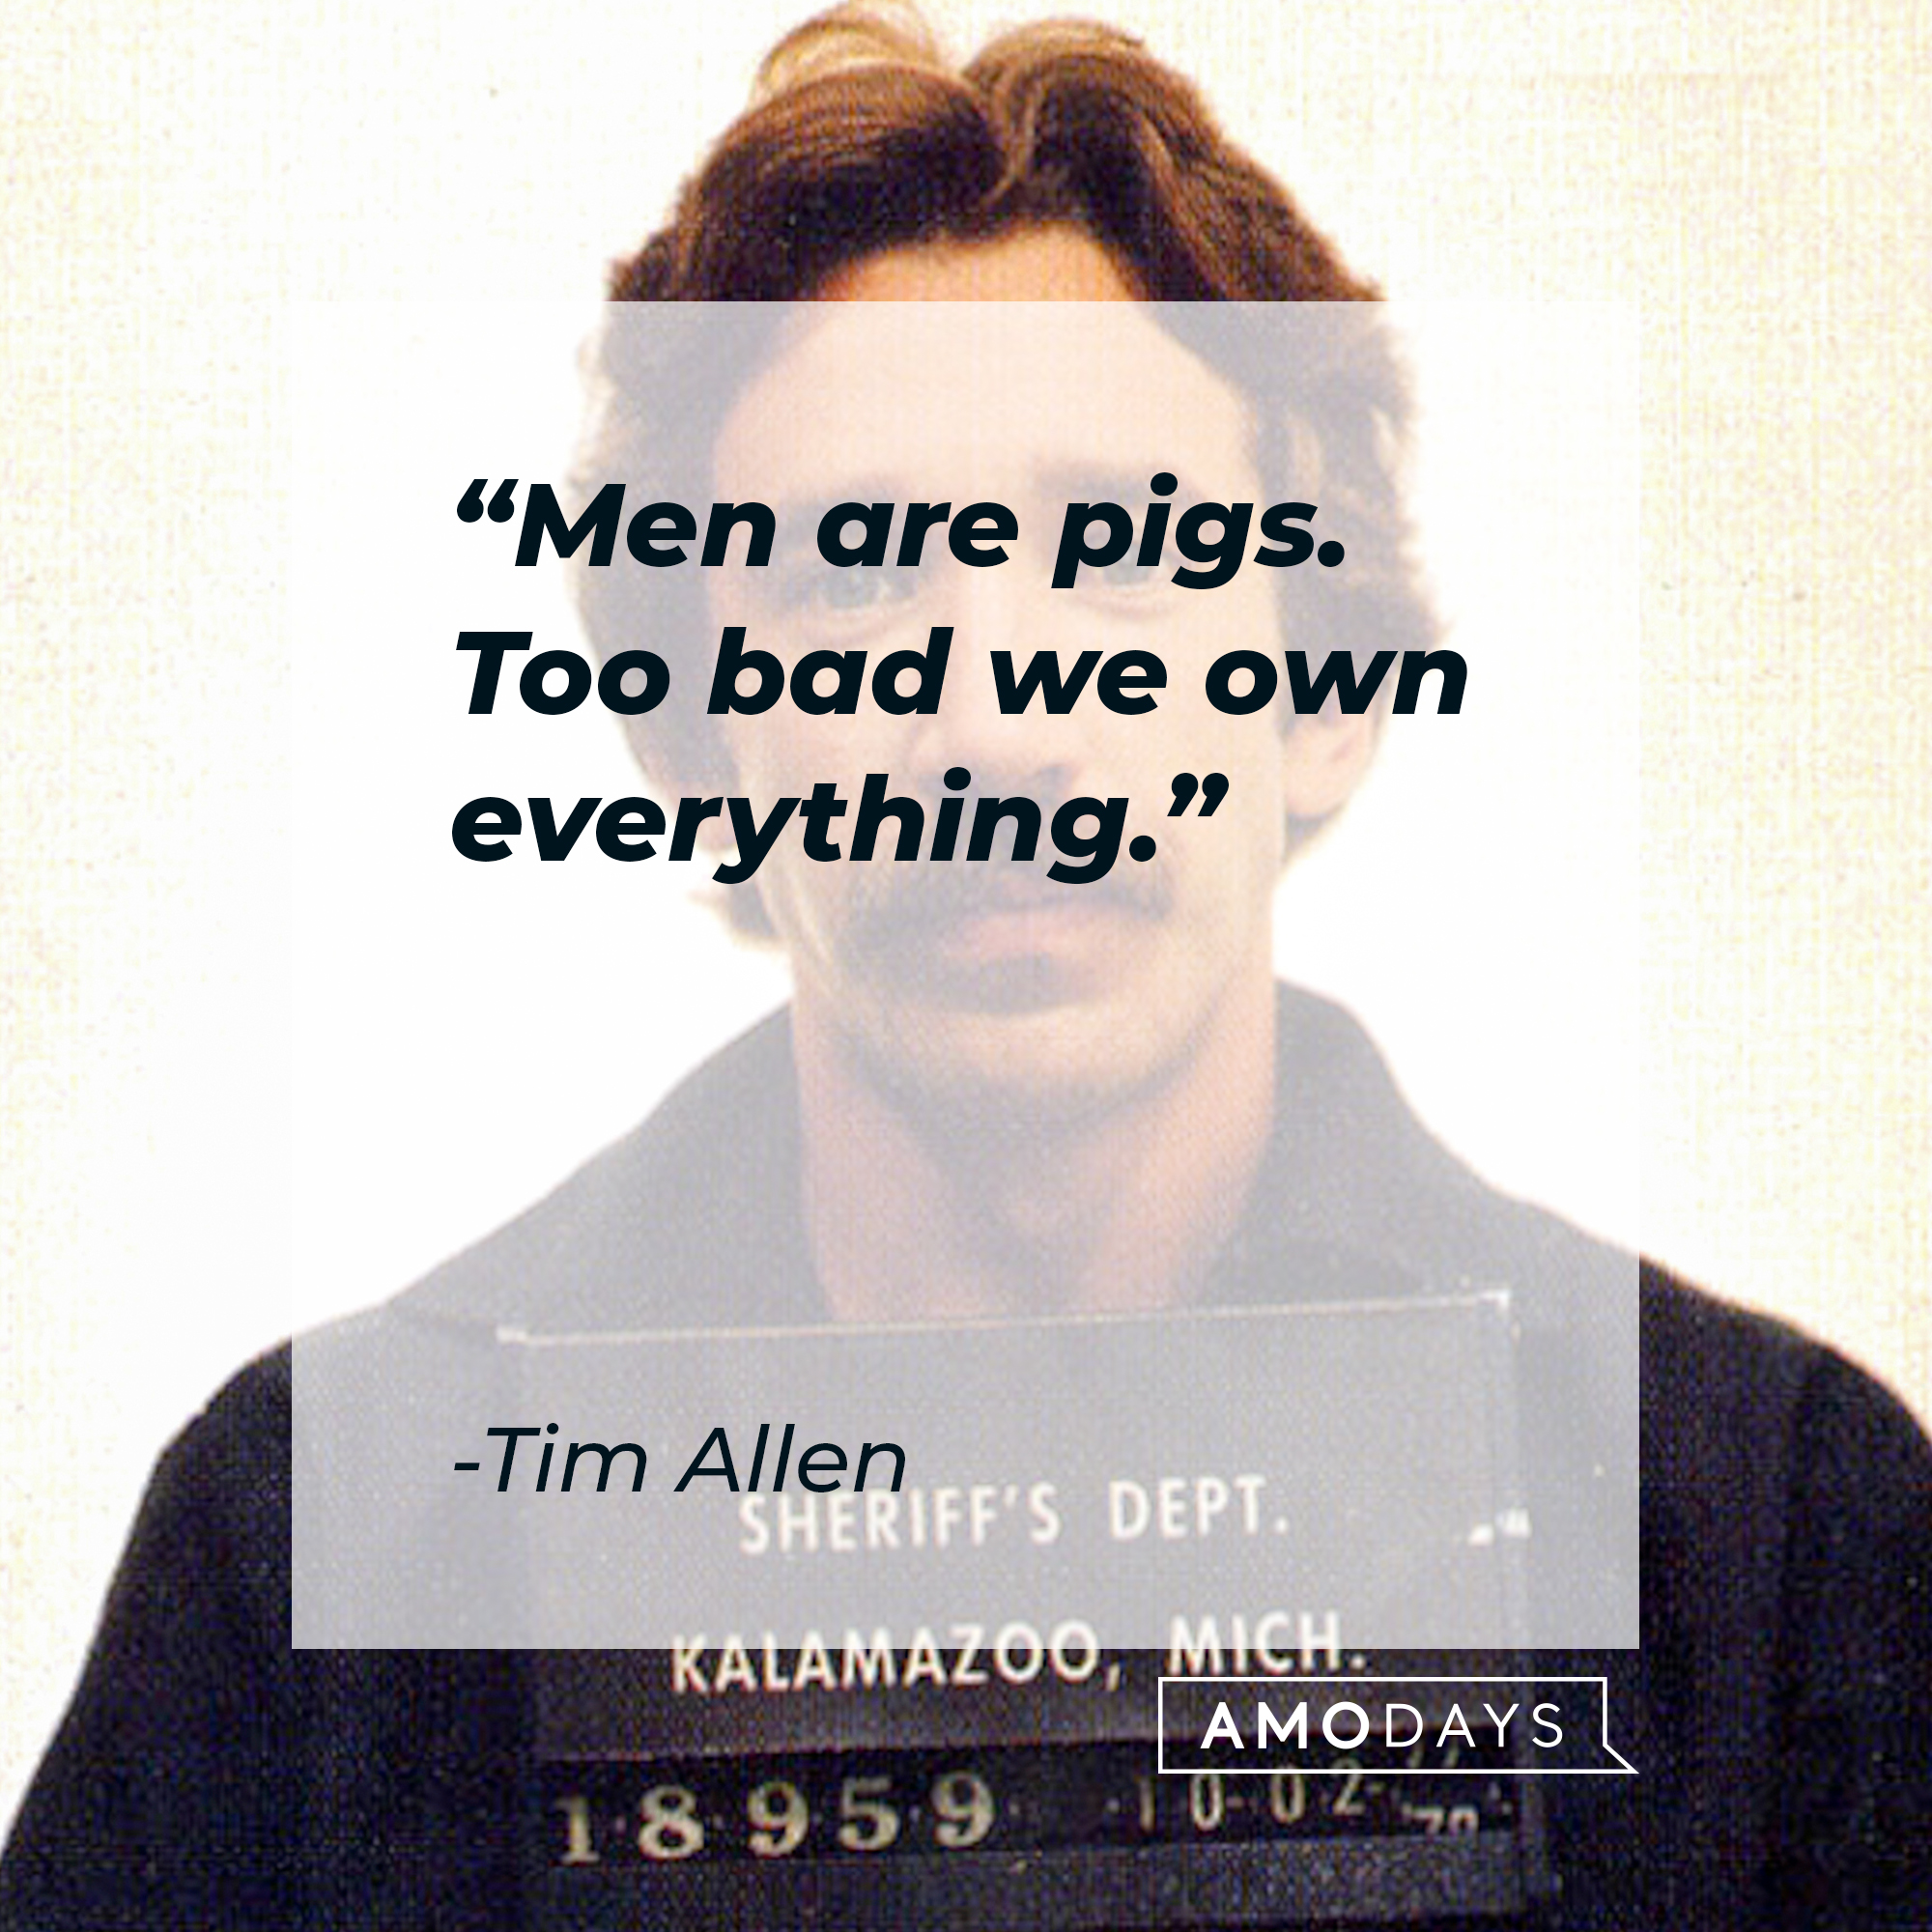 An image of Tim Allen, with his quote: “Men are pigs. Too bad we own everything.” ┃Source: Getty Images